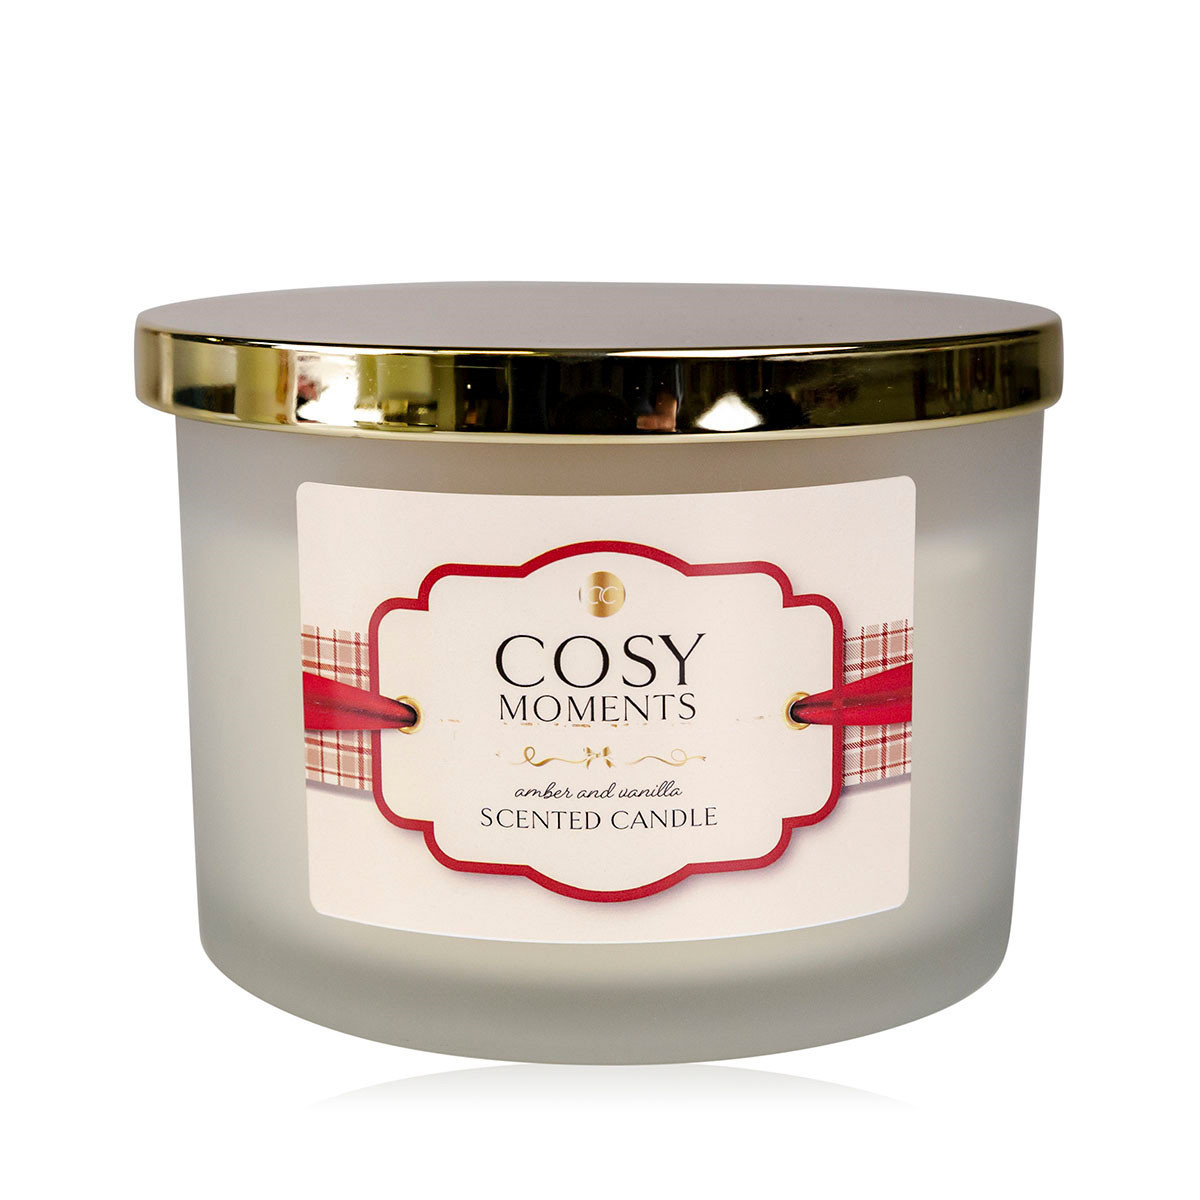 Accentra Vonná sviečka Cosy Moments (Scented Candle) 330 g